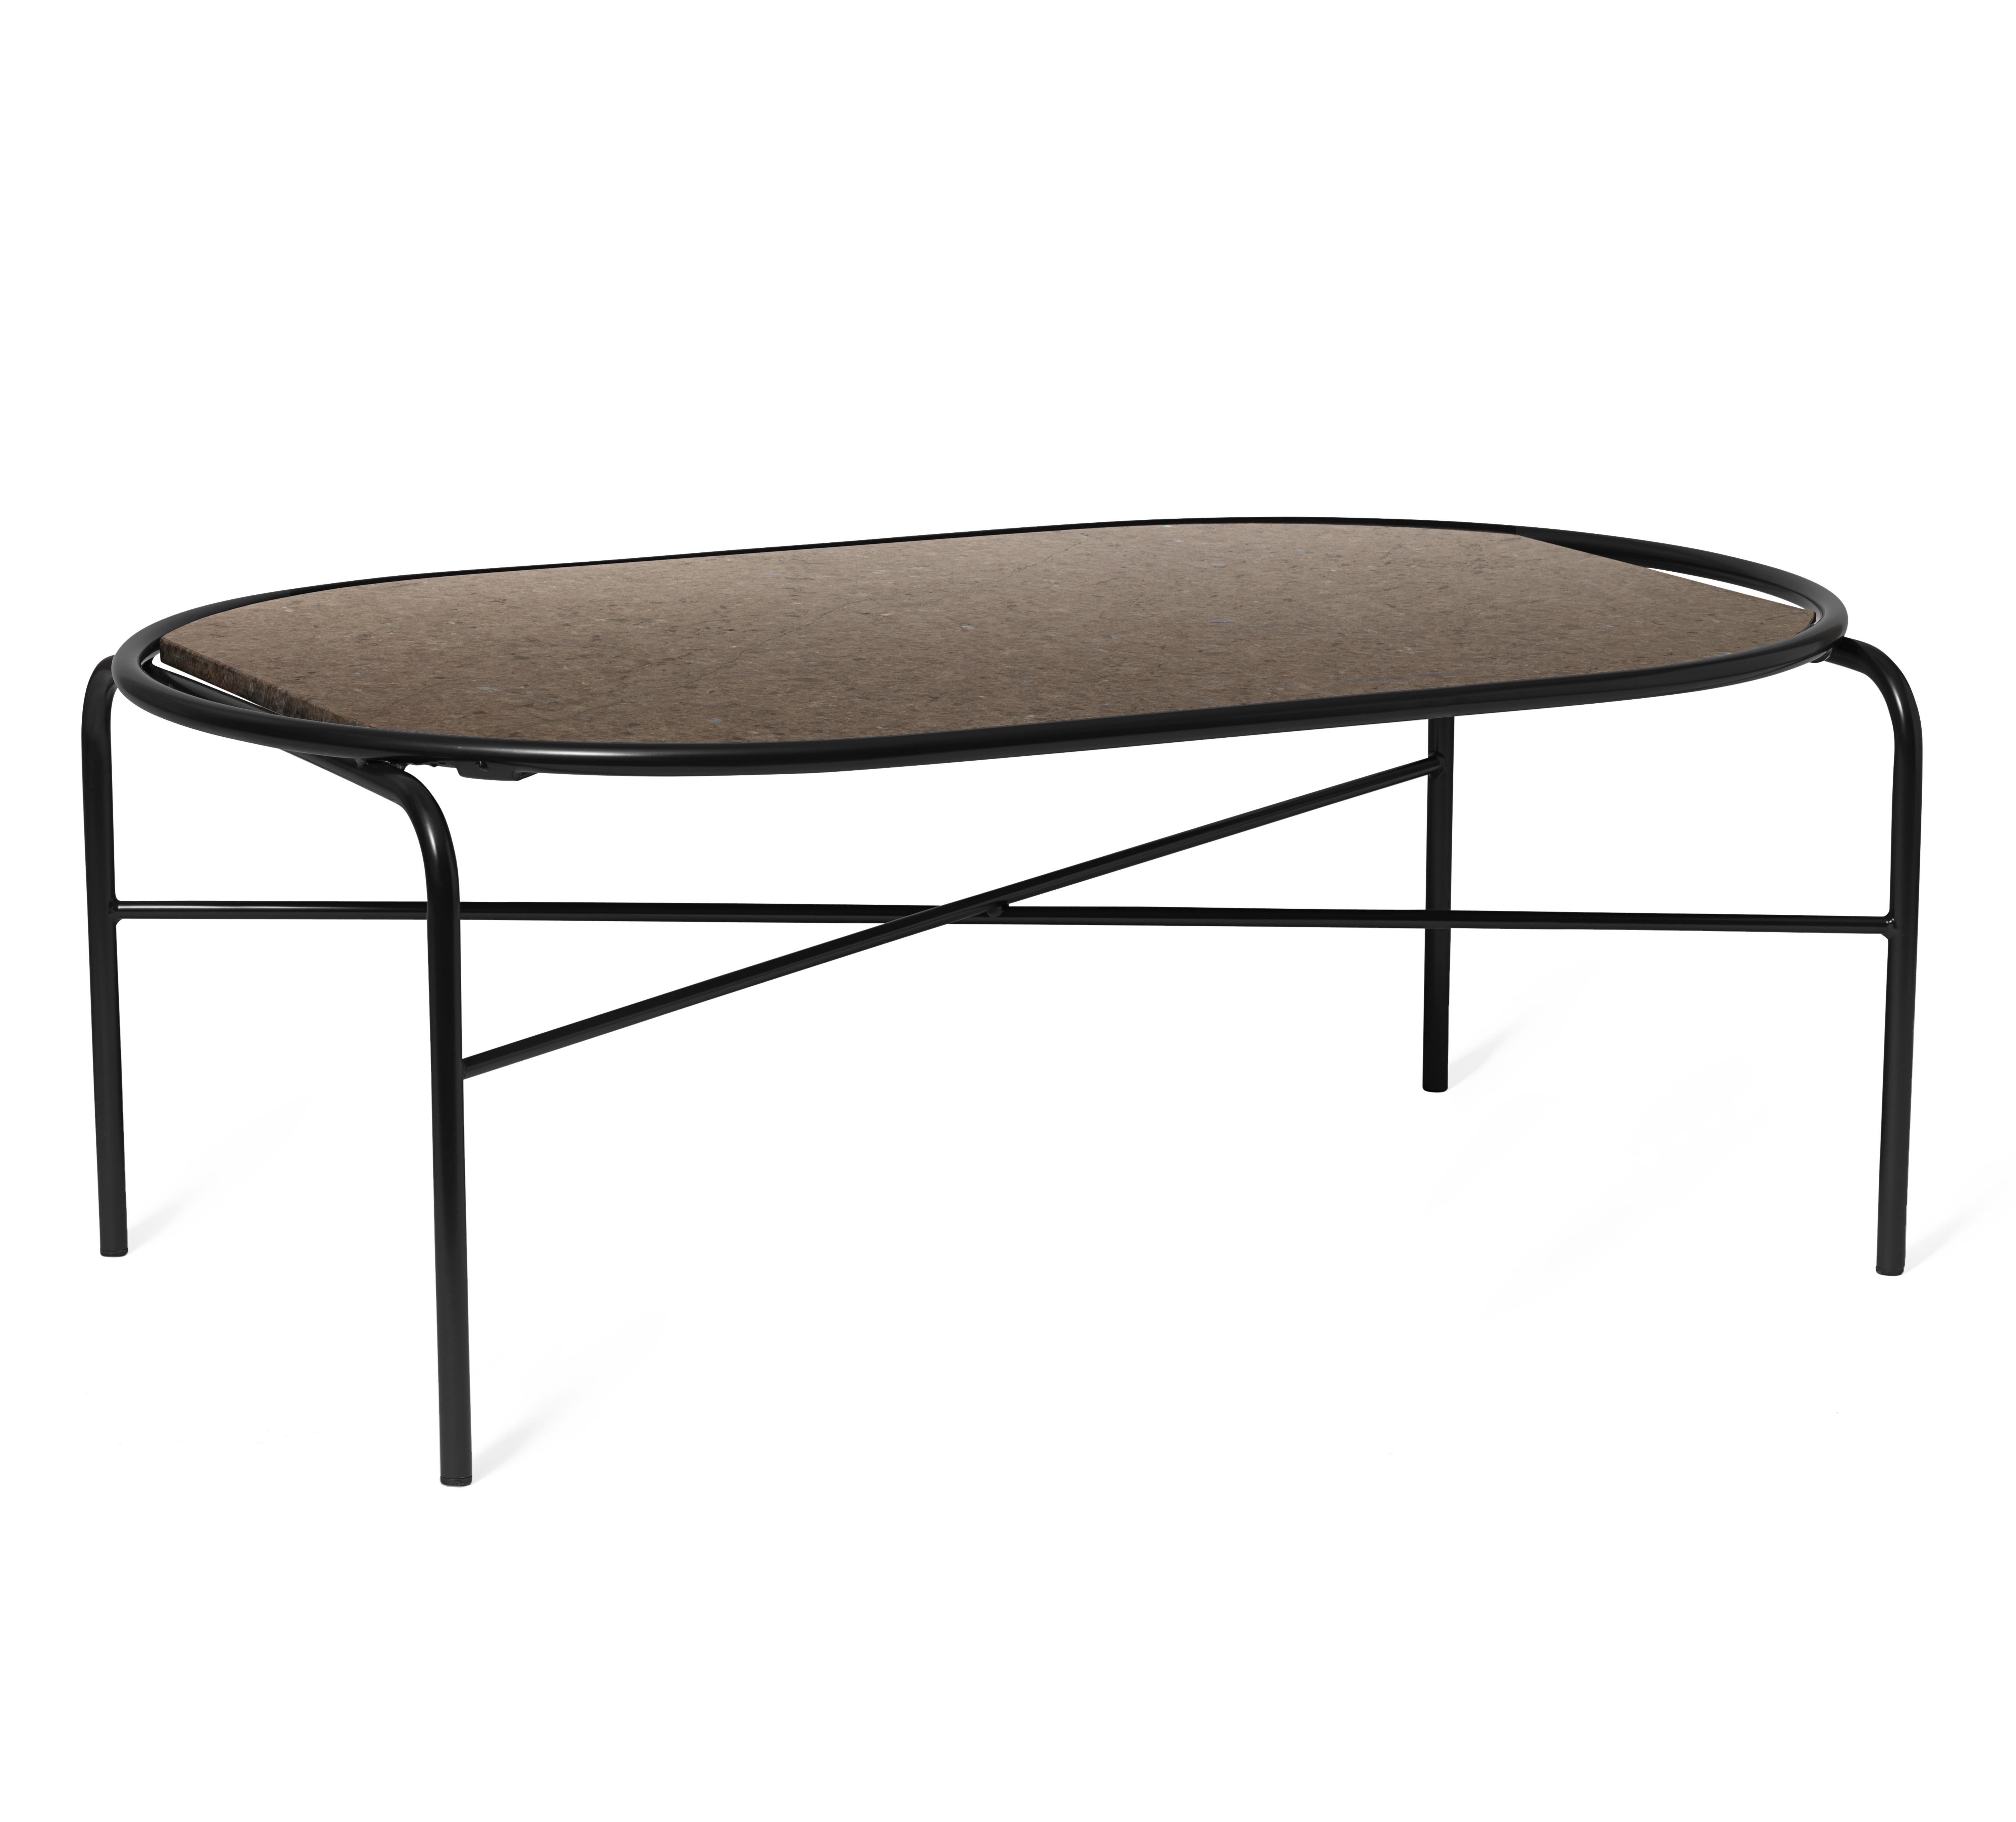 For Sale: Brown (Granite) Secant Oval Table in Steel Frame, by Sara Wright Polmar from Warm Nordic 2